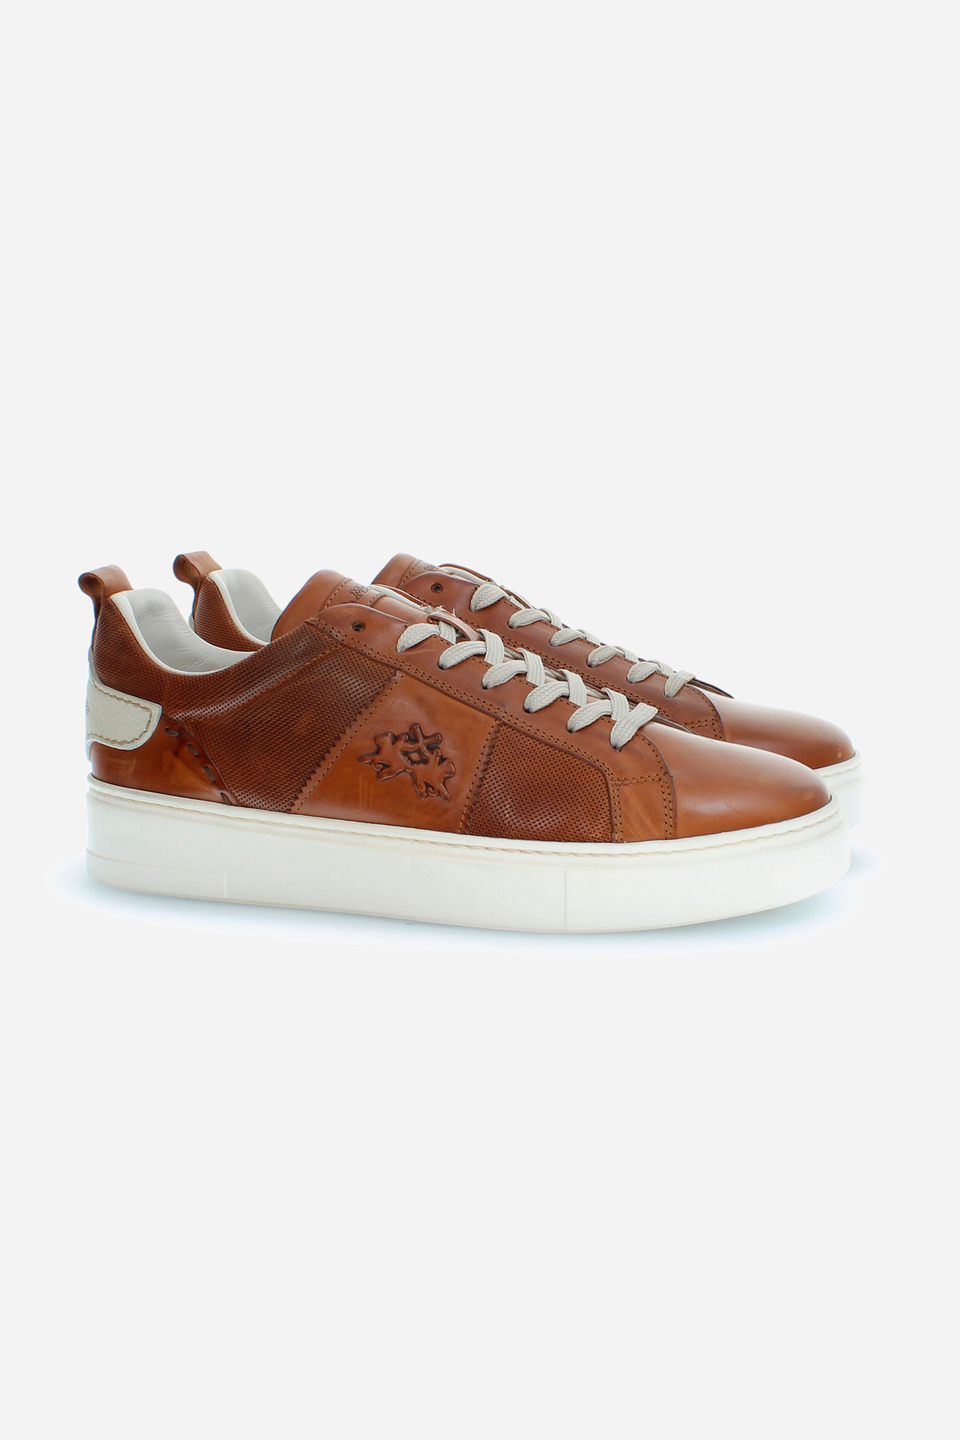 Men's leather trainers with contrasting inserts | La Martina - Official Online Shop